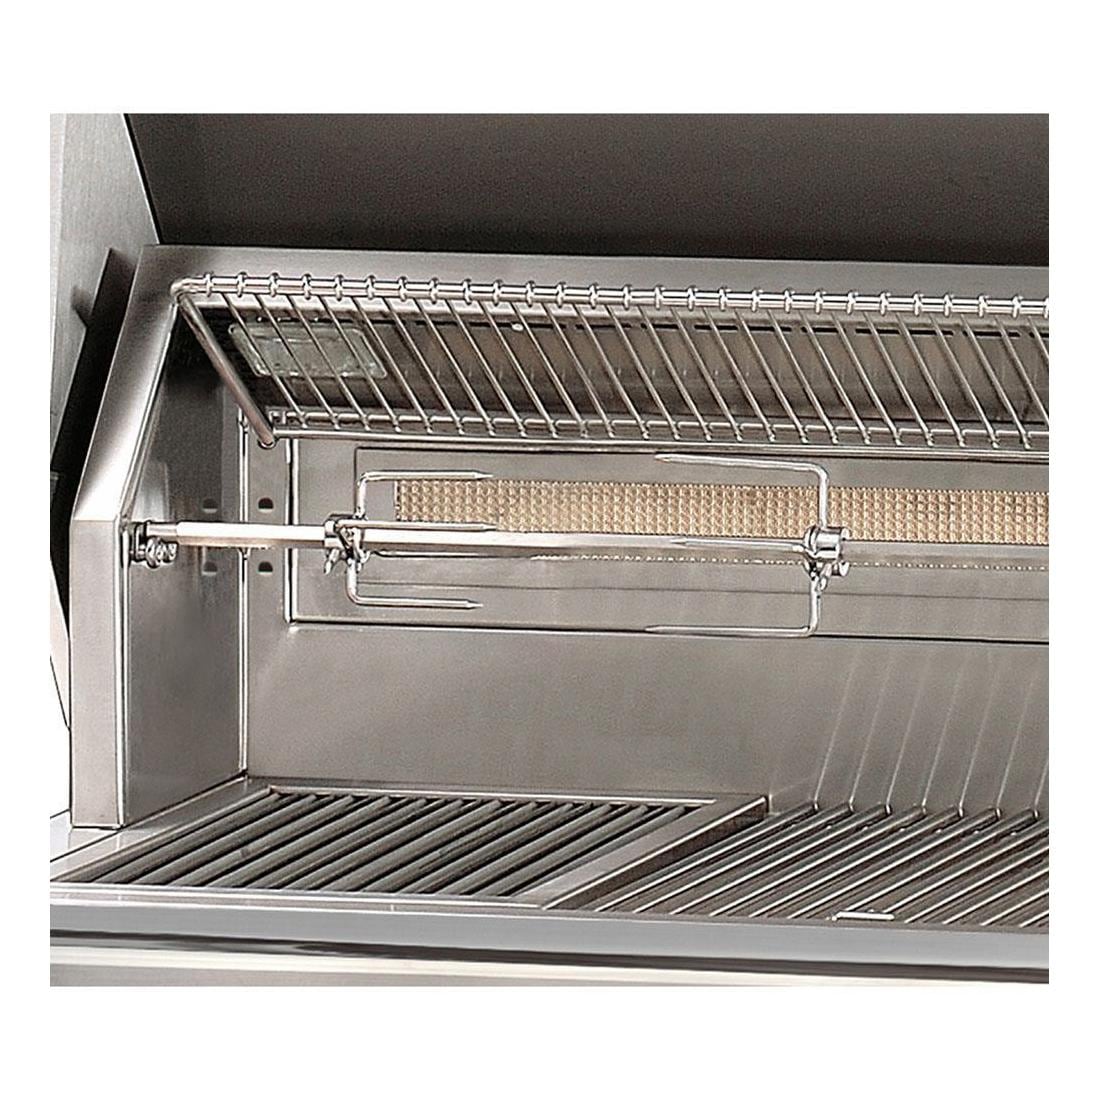 Alfresco ALXE 56-Inch Built-In Natural Gas Deluxe Grill With Rotisserie And Side Burner in Signal White Matte